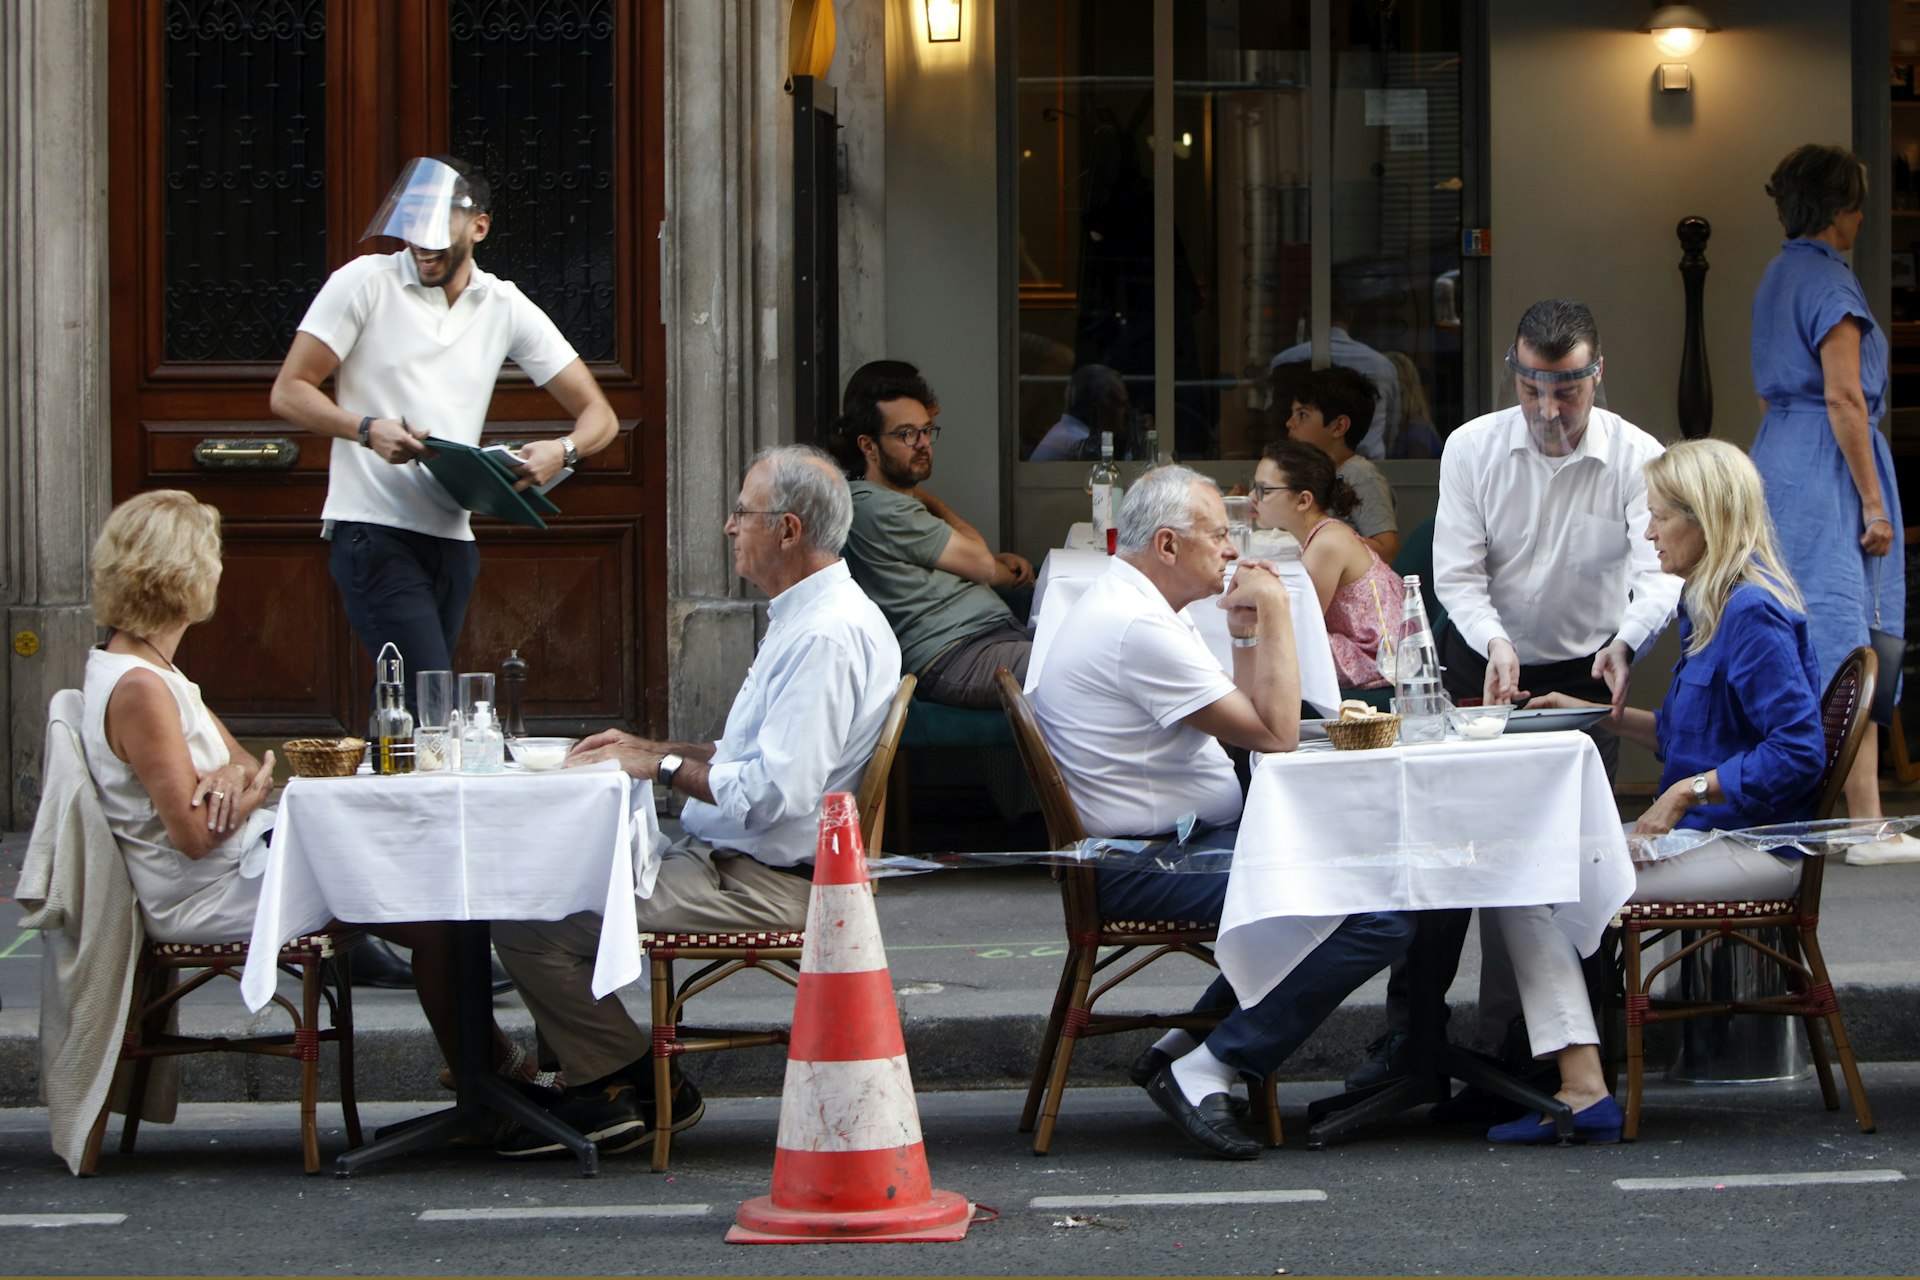 A waiter wearing a face mask serves clients while people eat and have drinks on the terrace of the cafe-restaurant in Paris